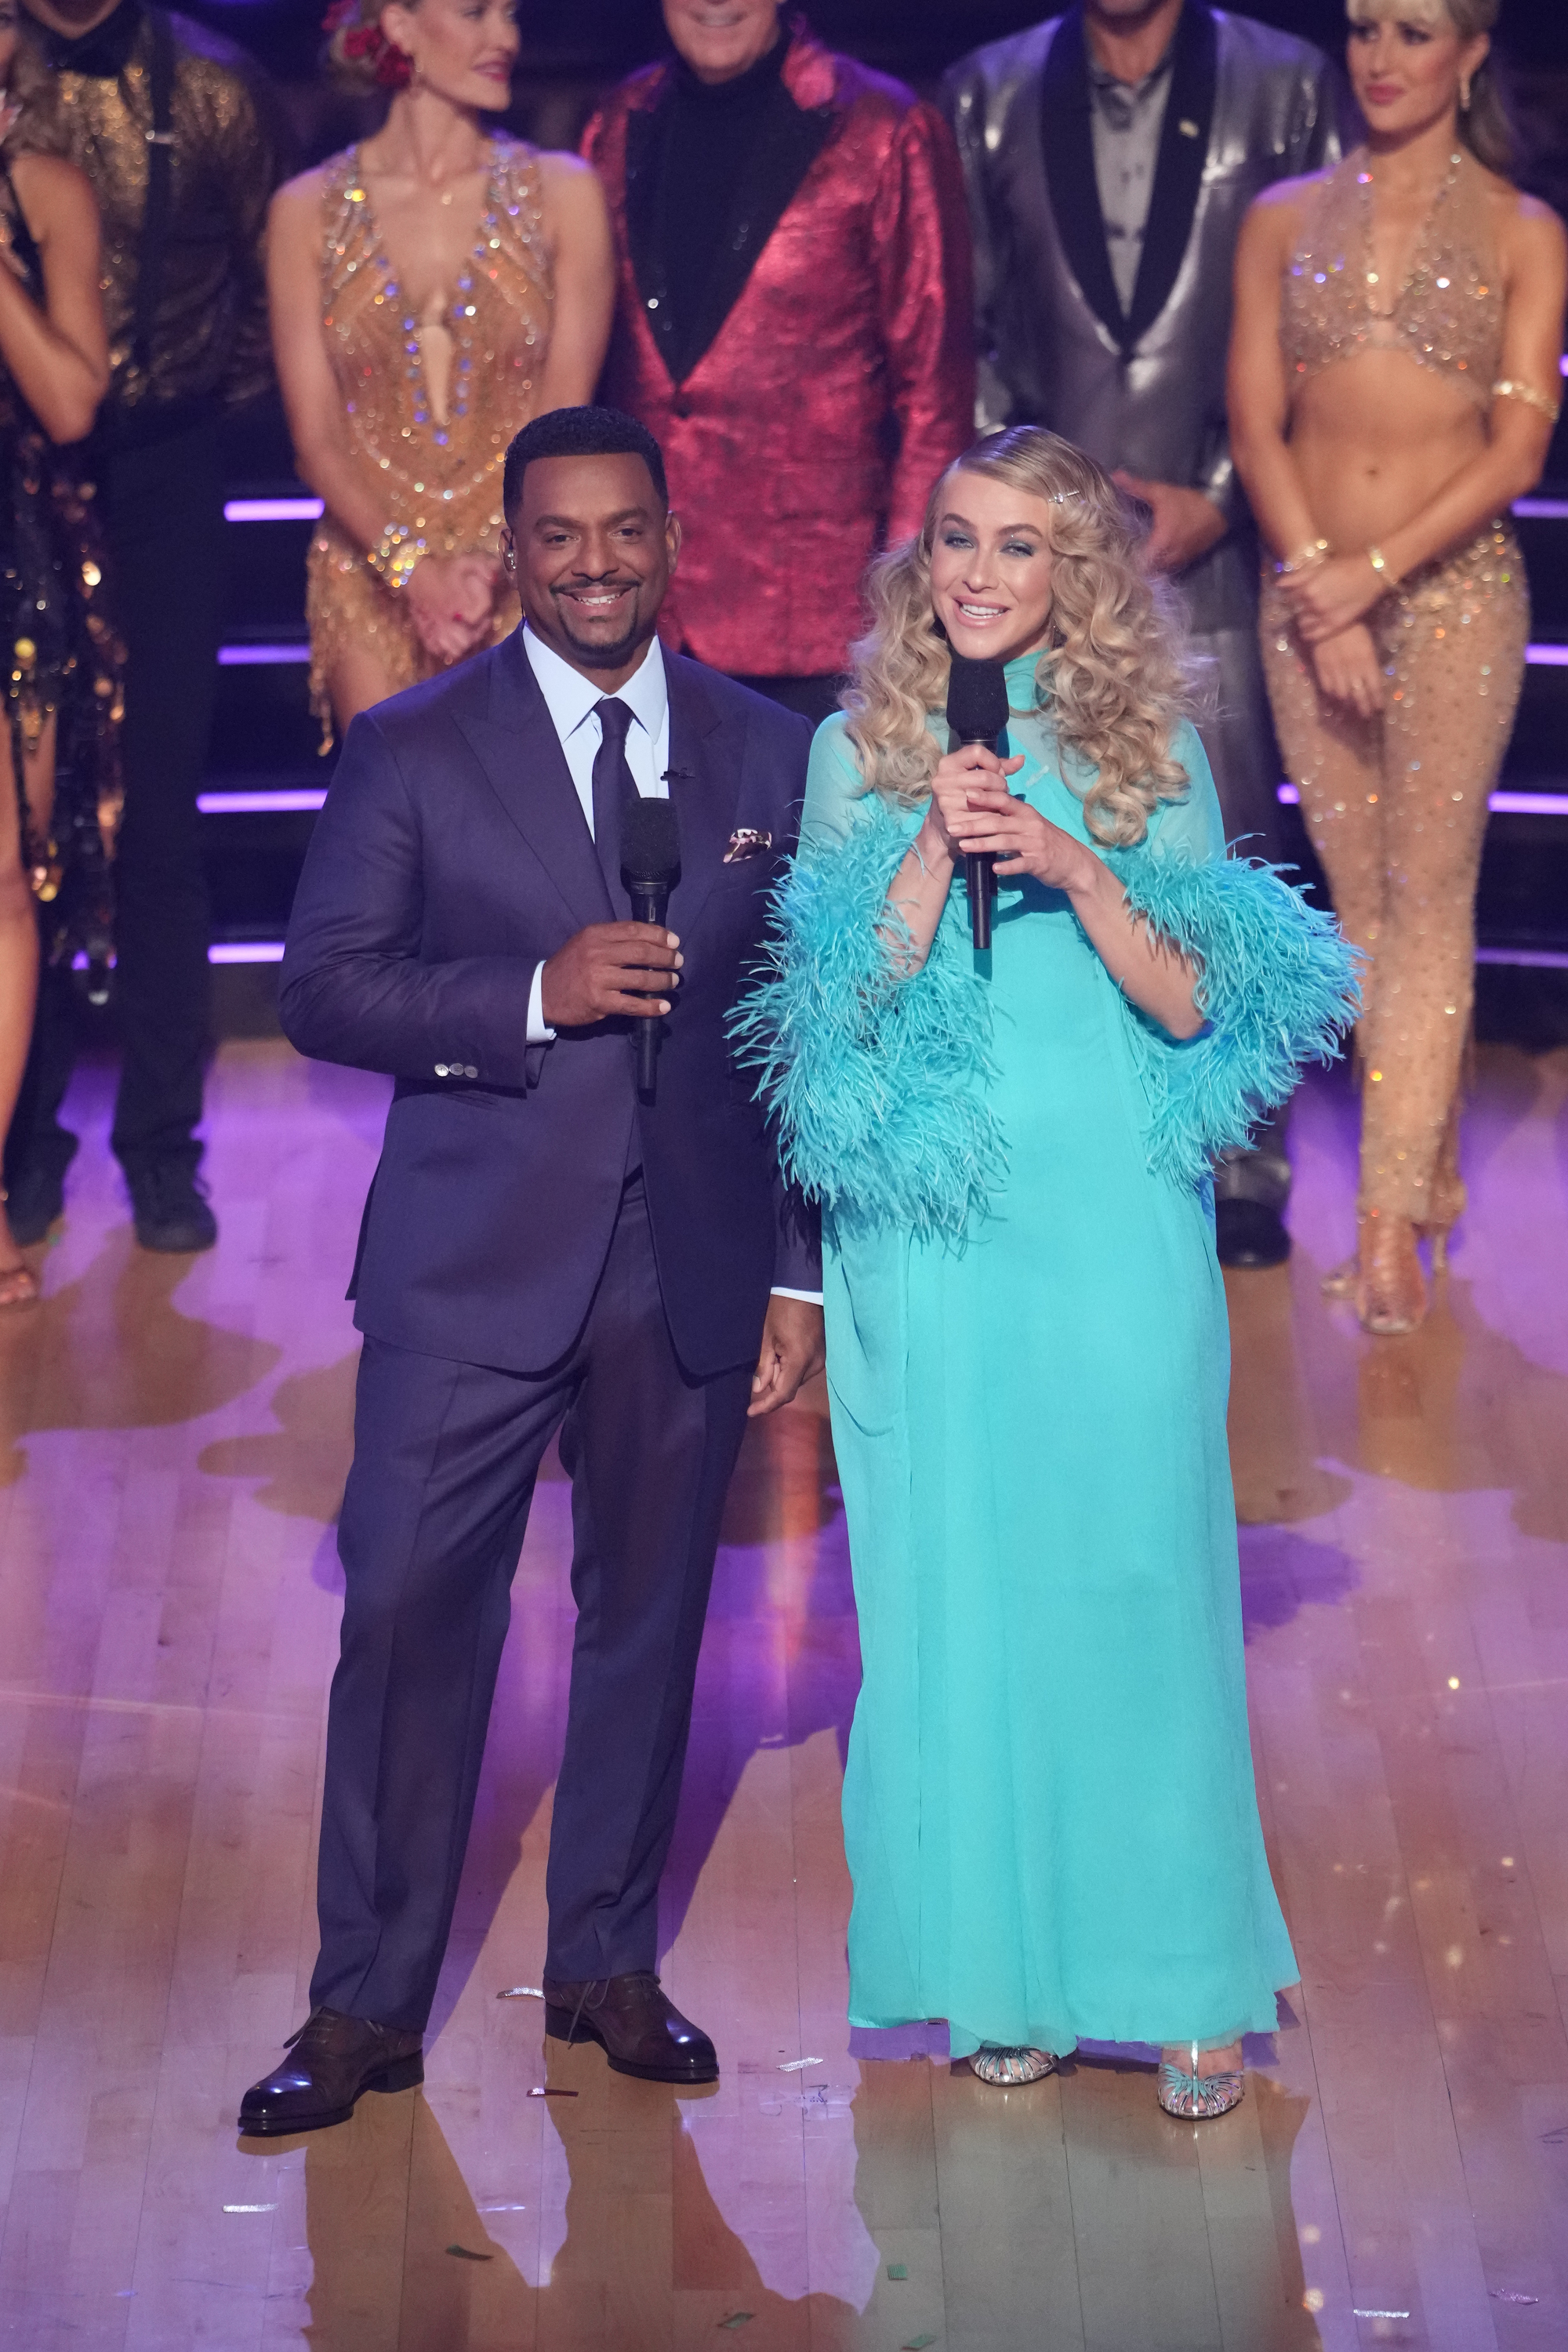 Julianne posed with Alfonso Ribeiro on the set of Dancing With The Stars